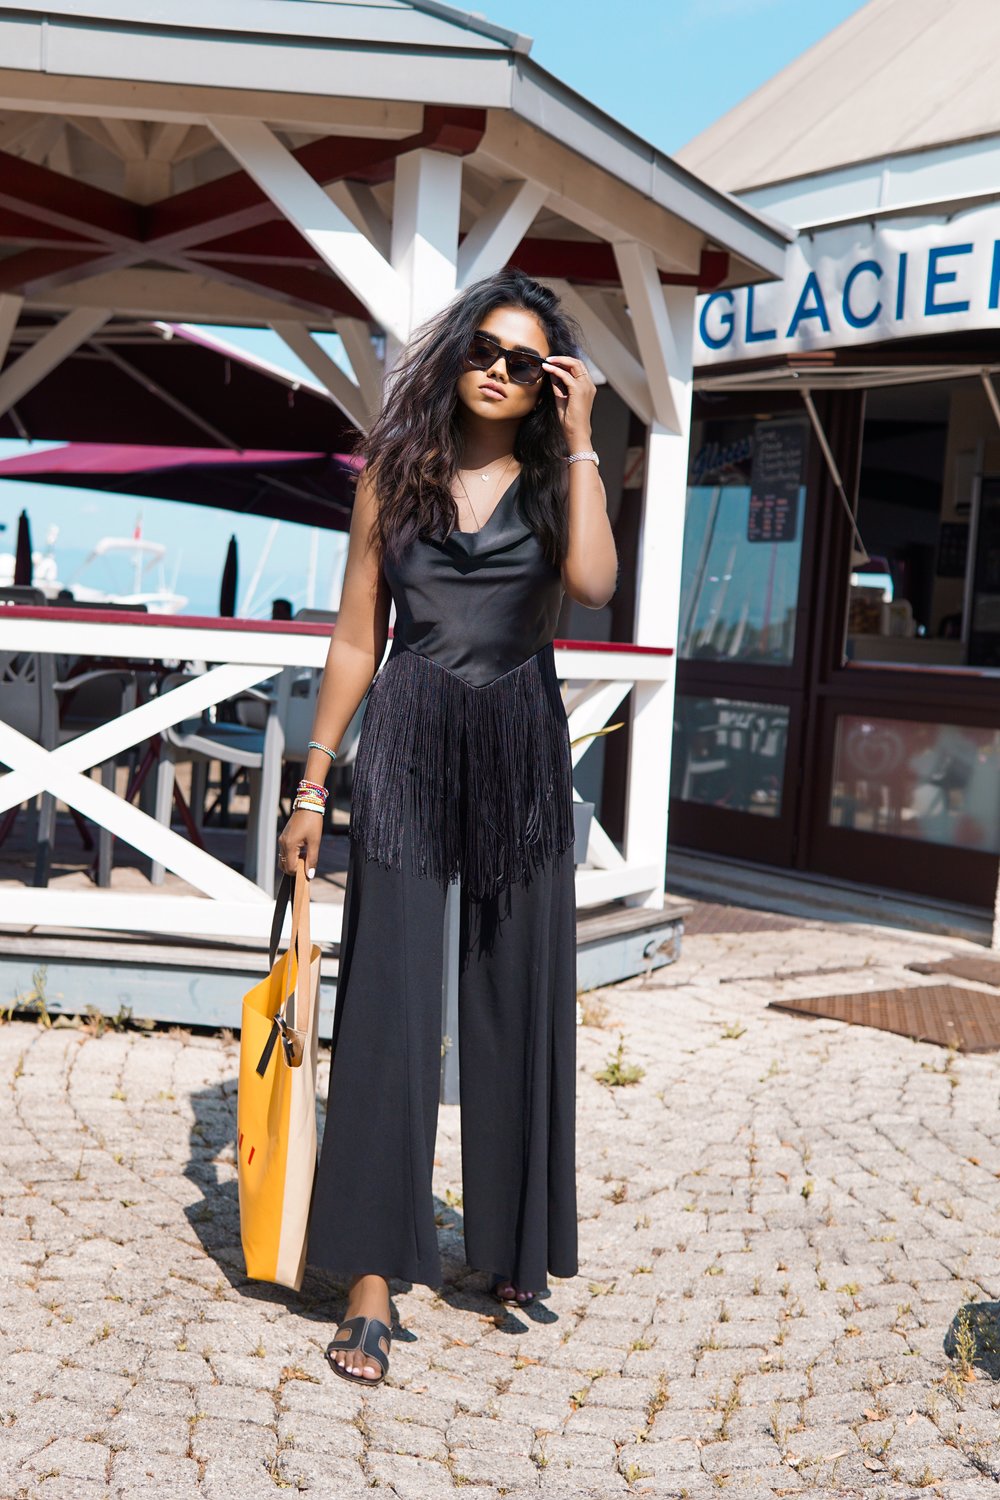 Sachini in front of a cafe wearing a black dresses and sunglasses holding a yellow Marni bag